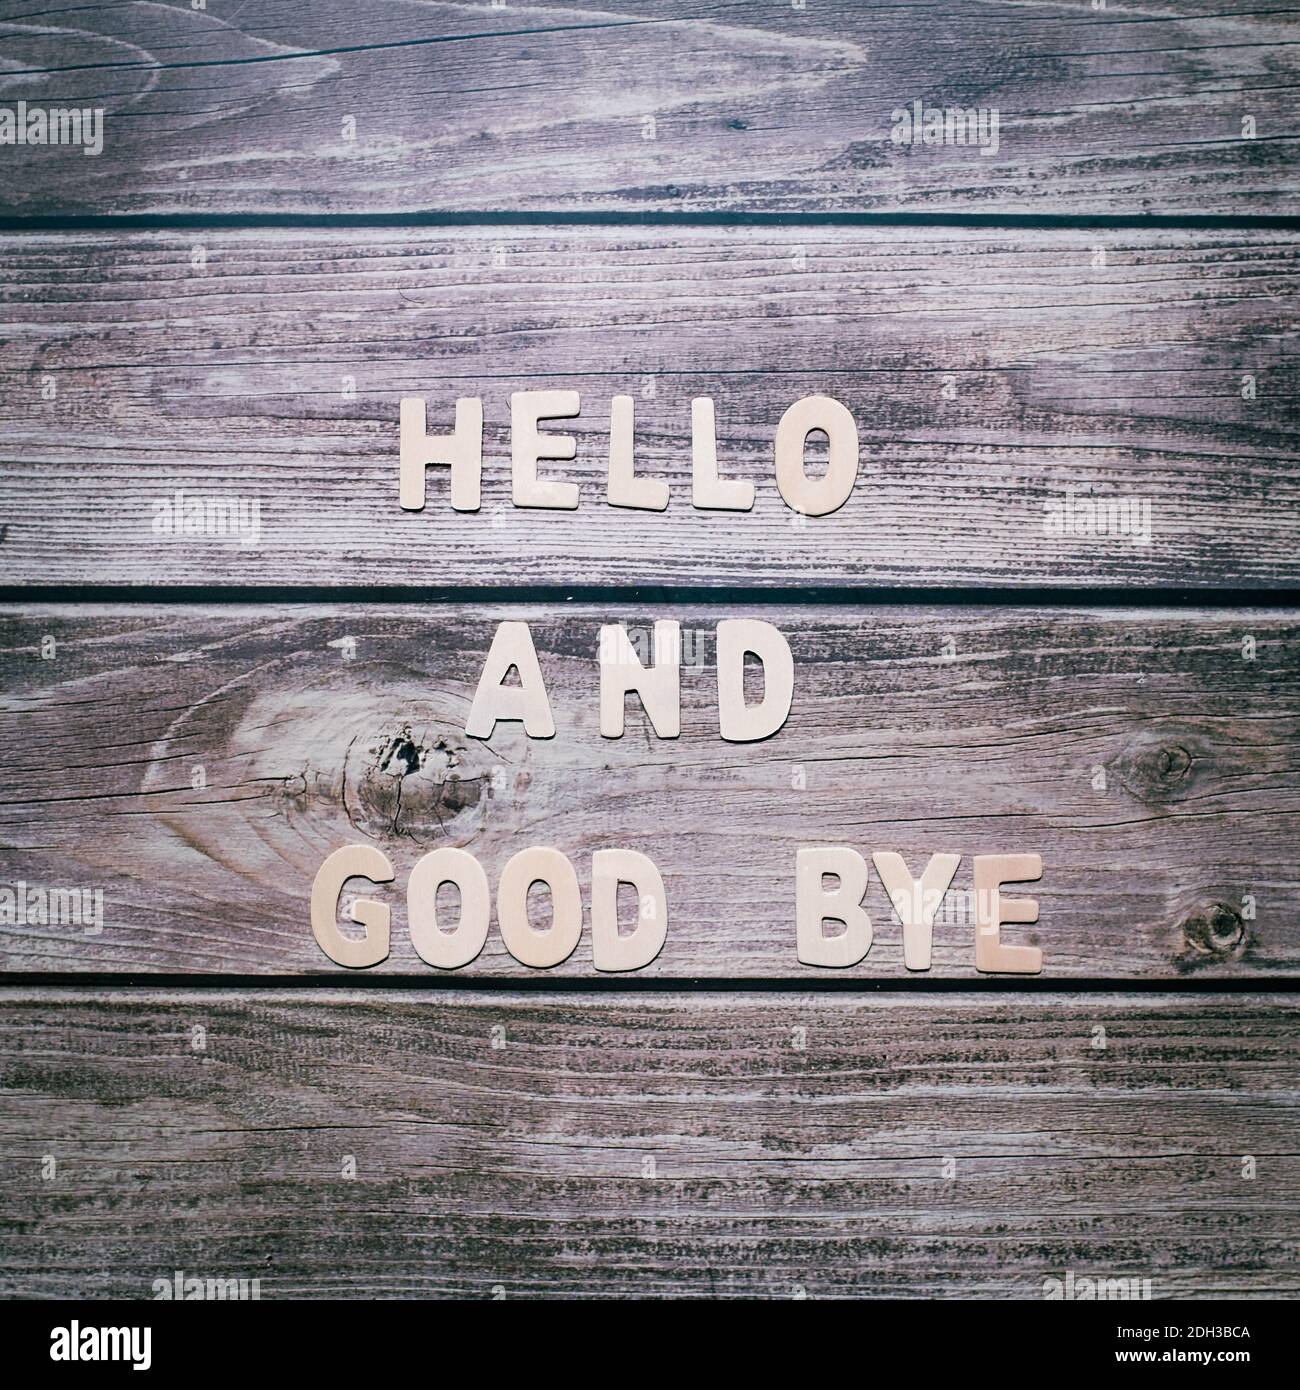 Hello and good bye wooden letters written no a striped wooden background Stock Photo